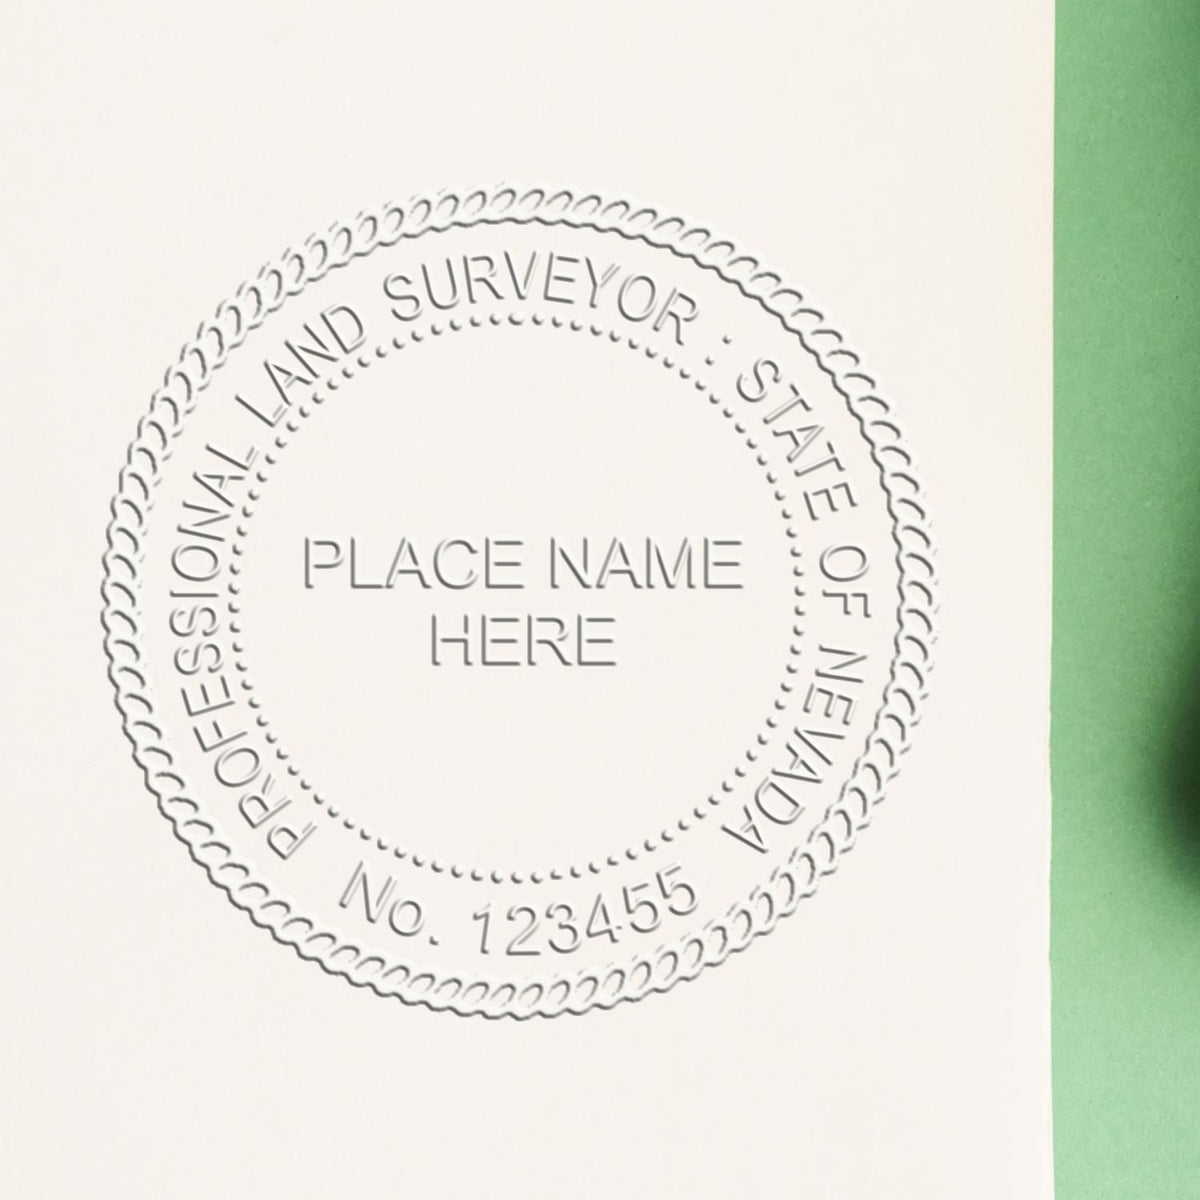 A stamped impression of the Nevada Desk Surveyor Seal Embosser in this stylish lifestyle photo, setting the tone for a unique and personalized product.